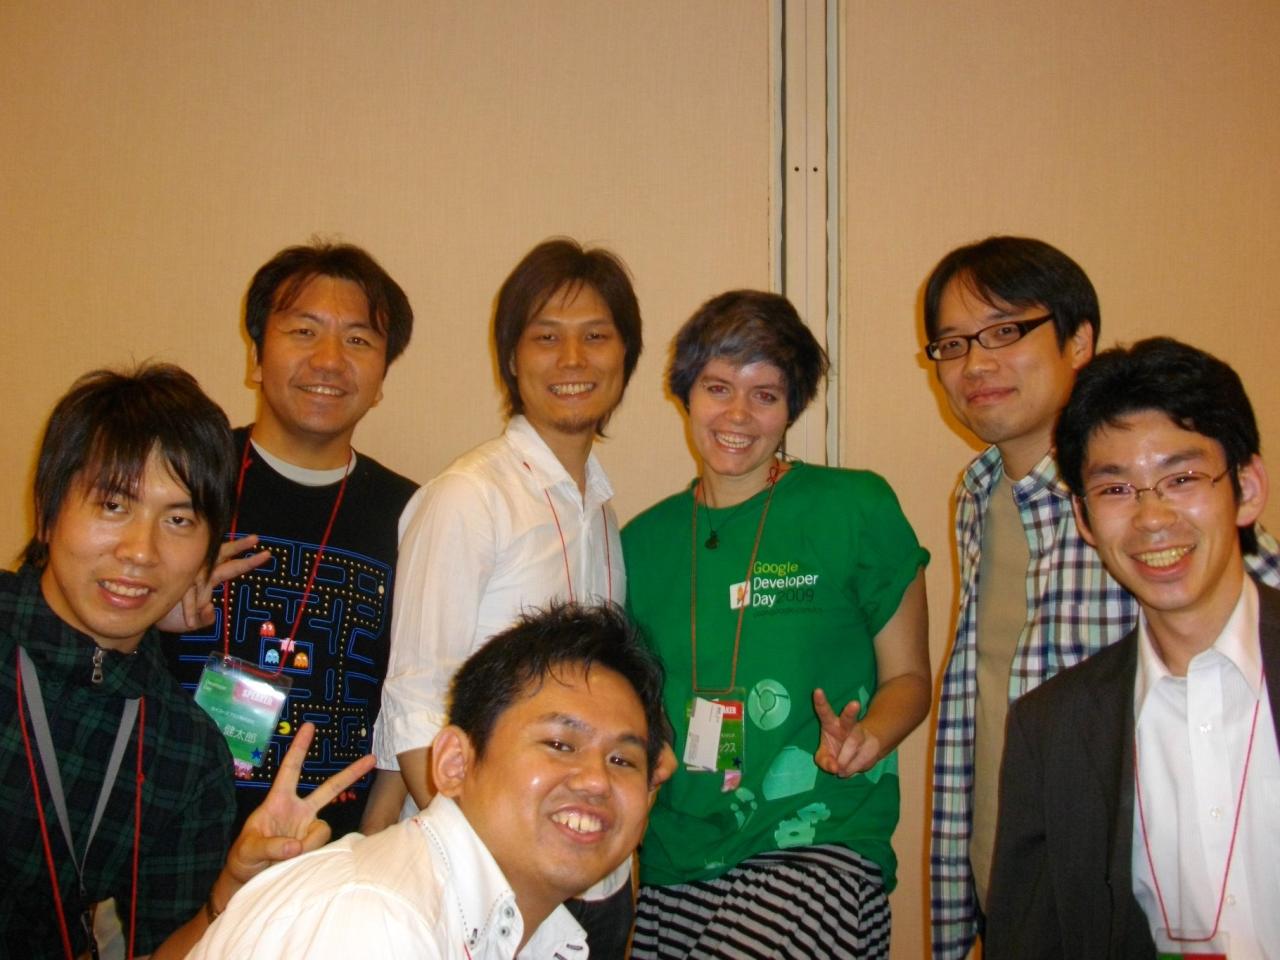 there are six people smiling and standing together